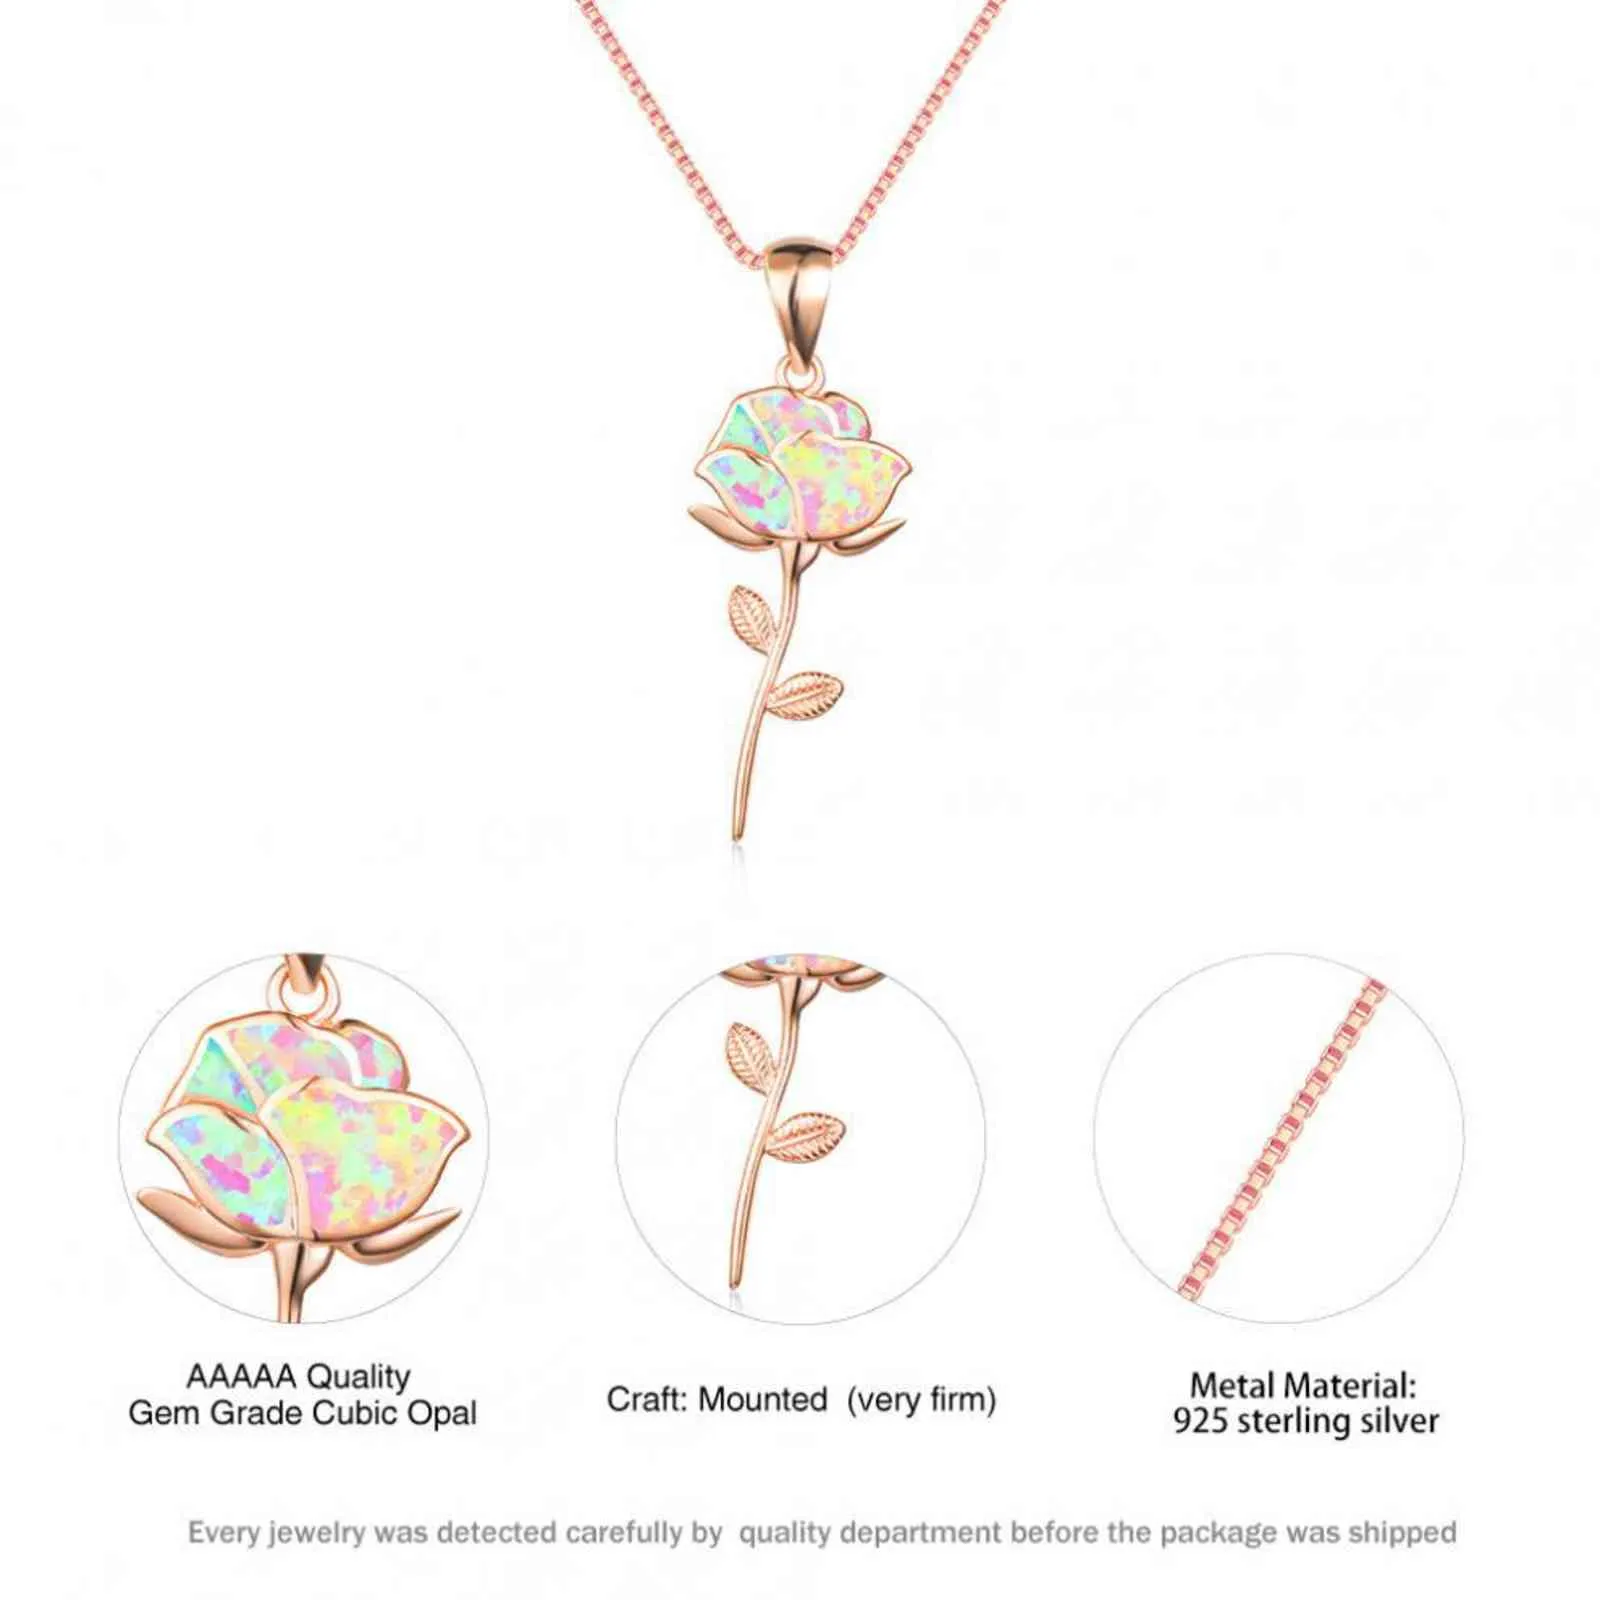 One Piece White Opal Rose Gold Flower Pendant Necklace For Women France Romantic Box Chain Wedding Neck Jewelry Gift3014889